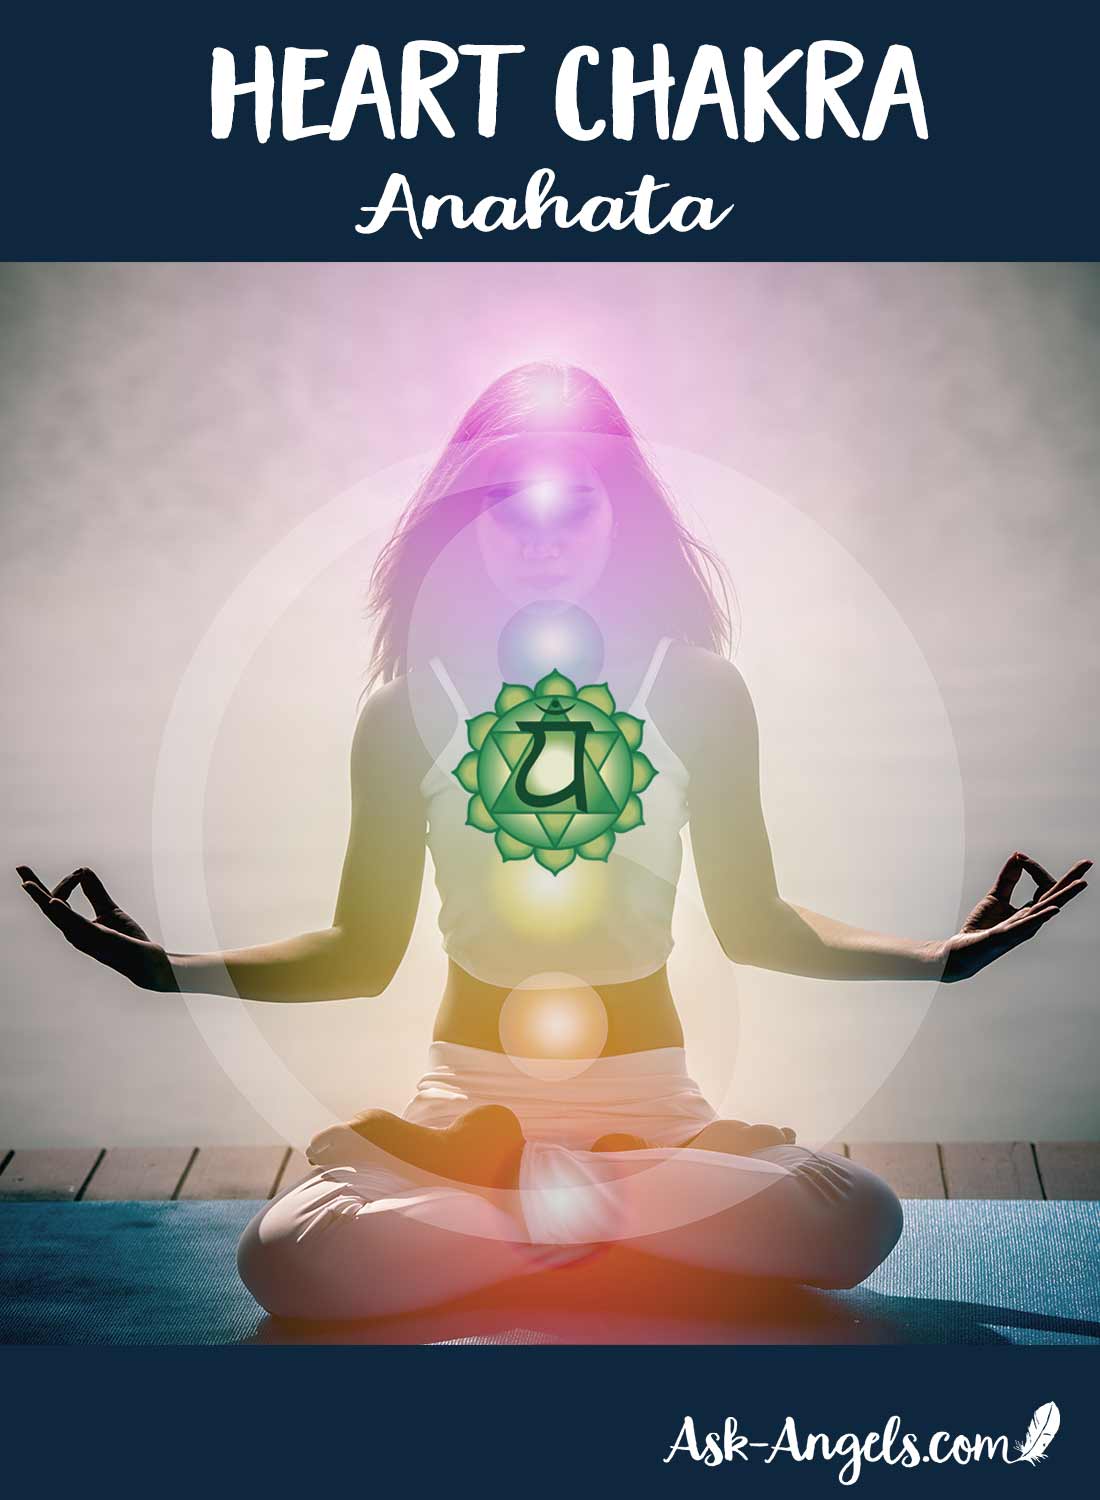 Your heart chakra is the center point if your 7 chakra system and brings balance and harmony to your entire chakra system.